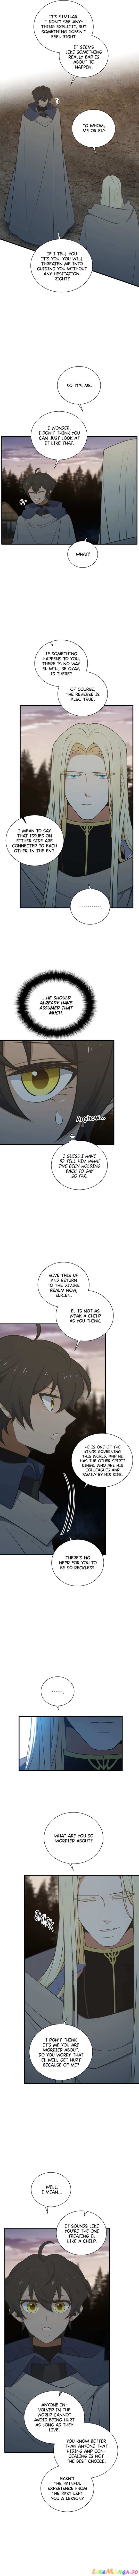 Elqueeness - Page 4